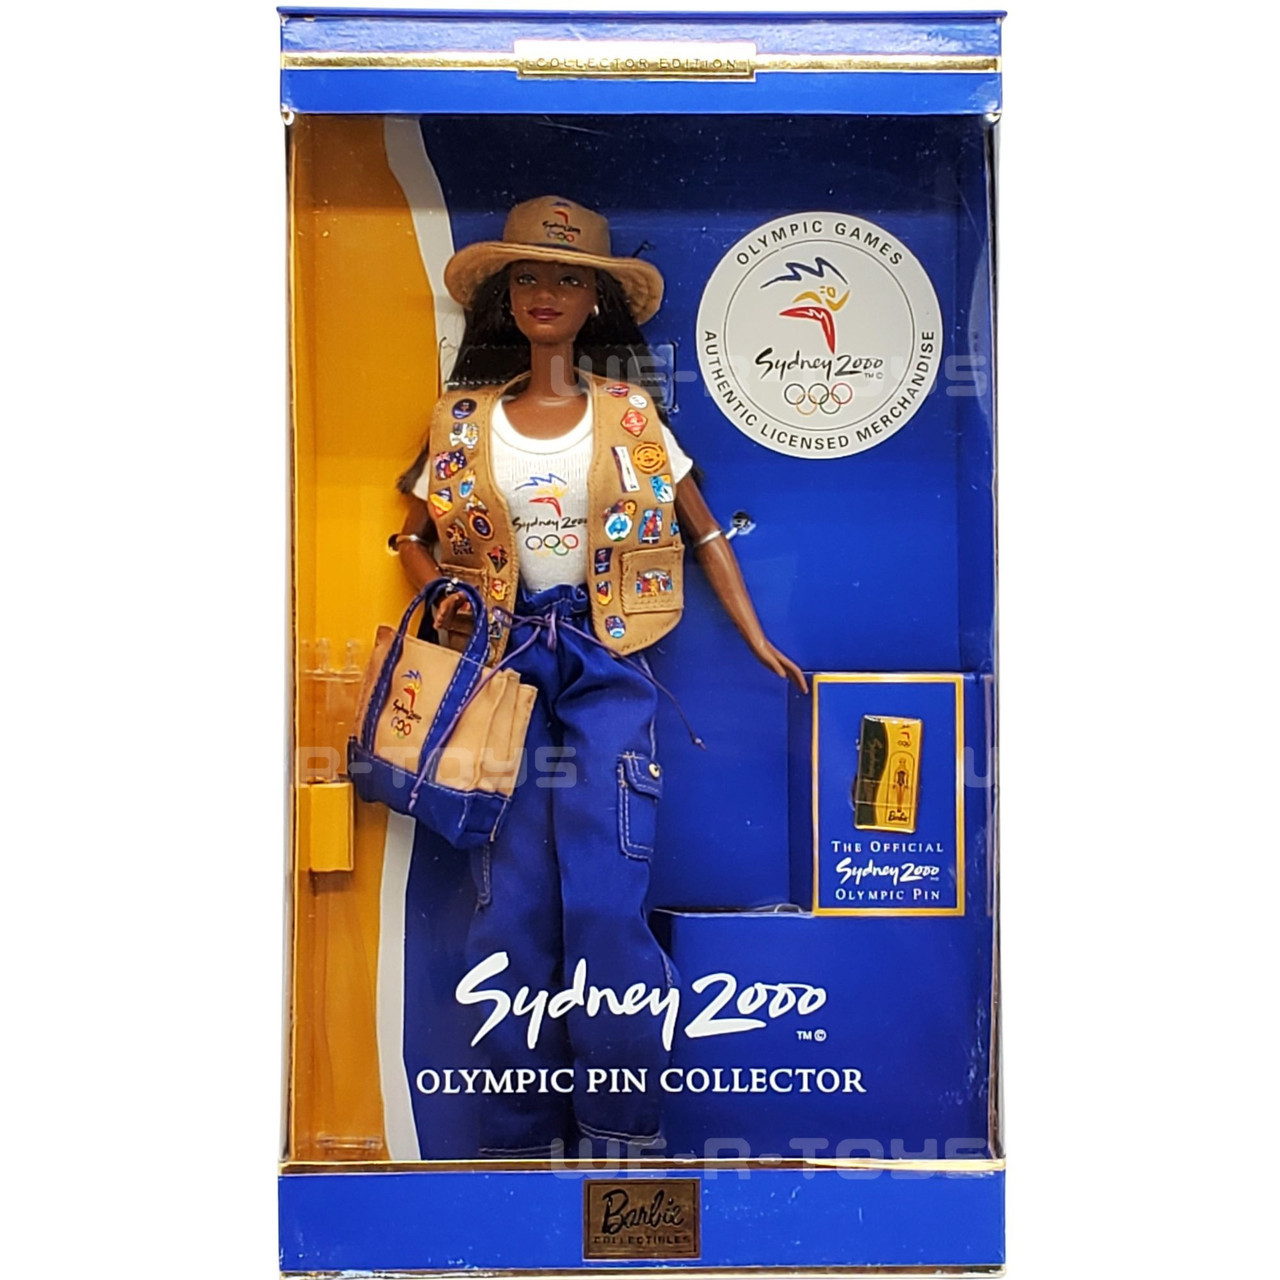 Barbie Sydney 2000 Olympic Pin Collector African American Doll Mattel 26302